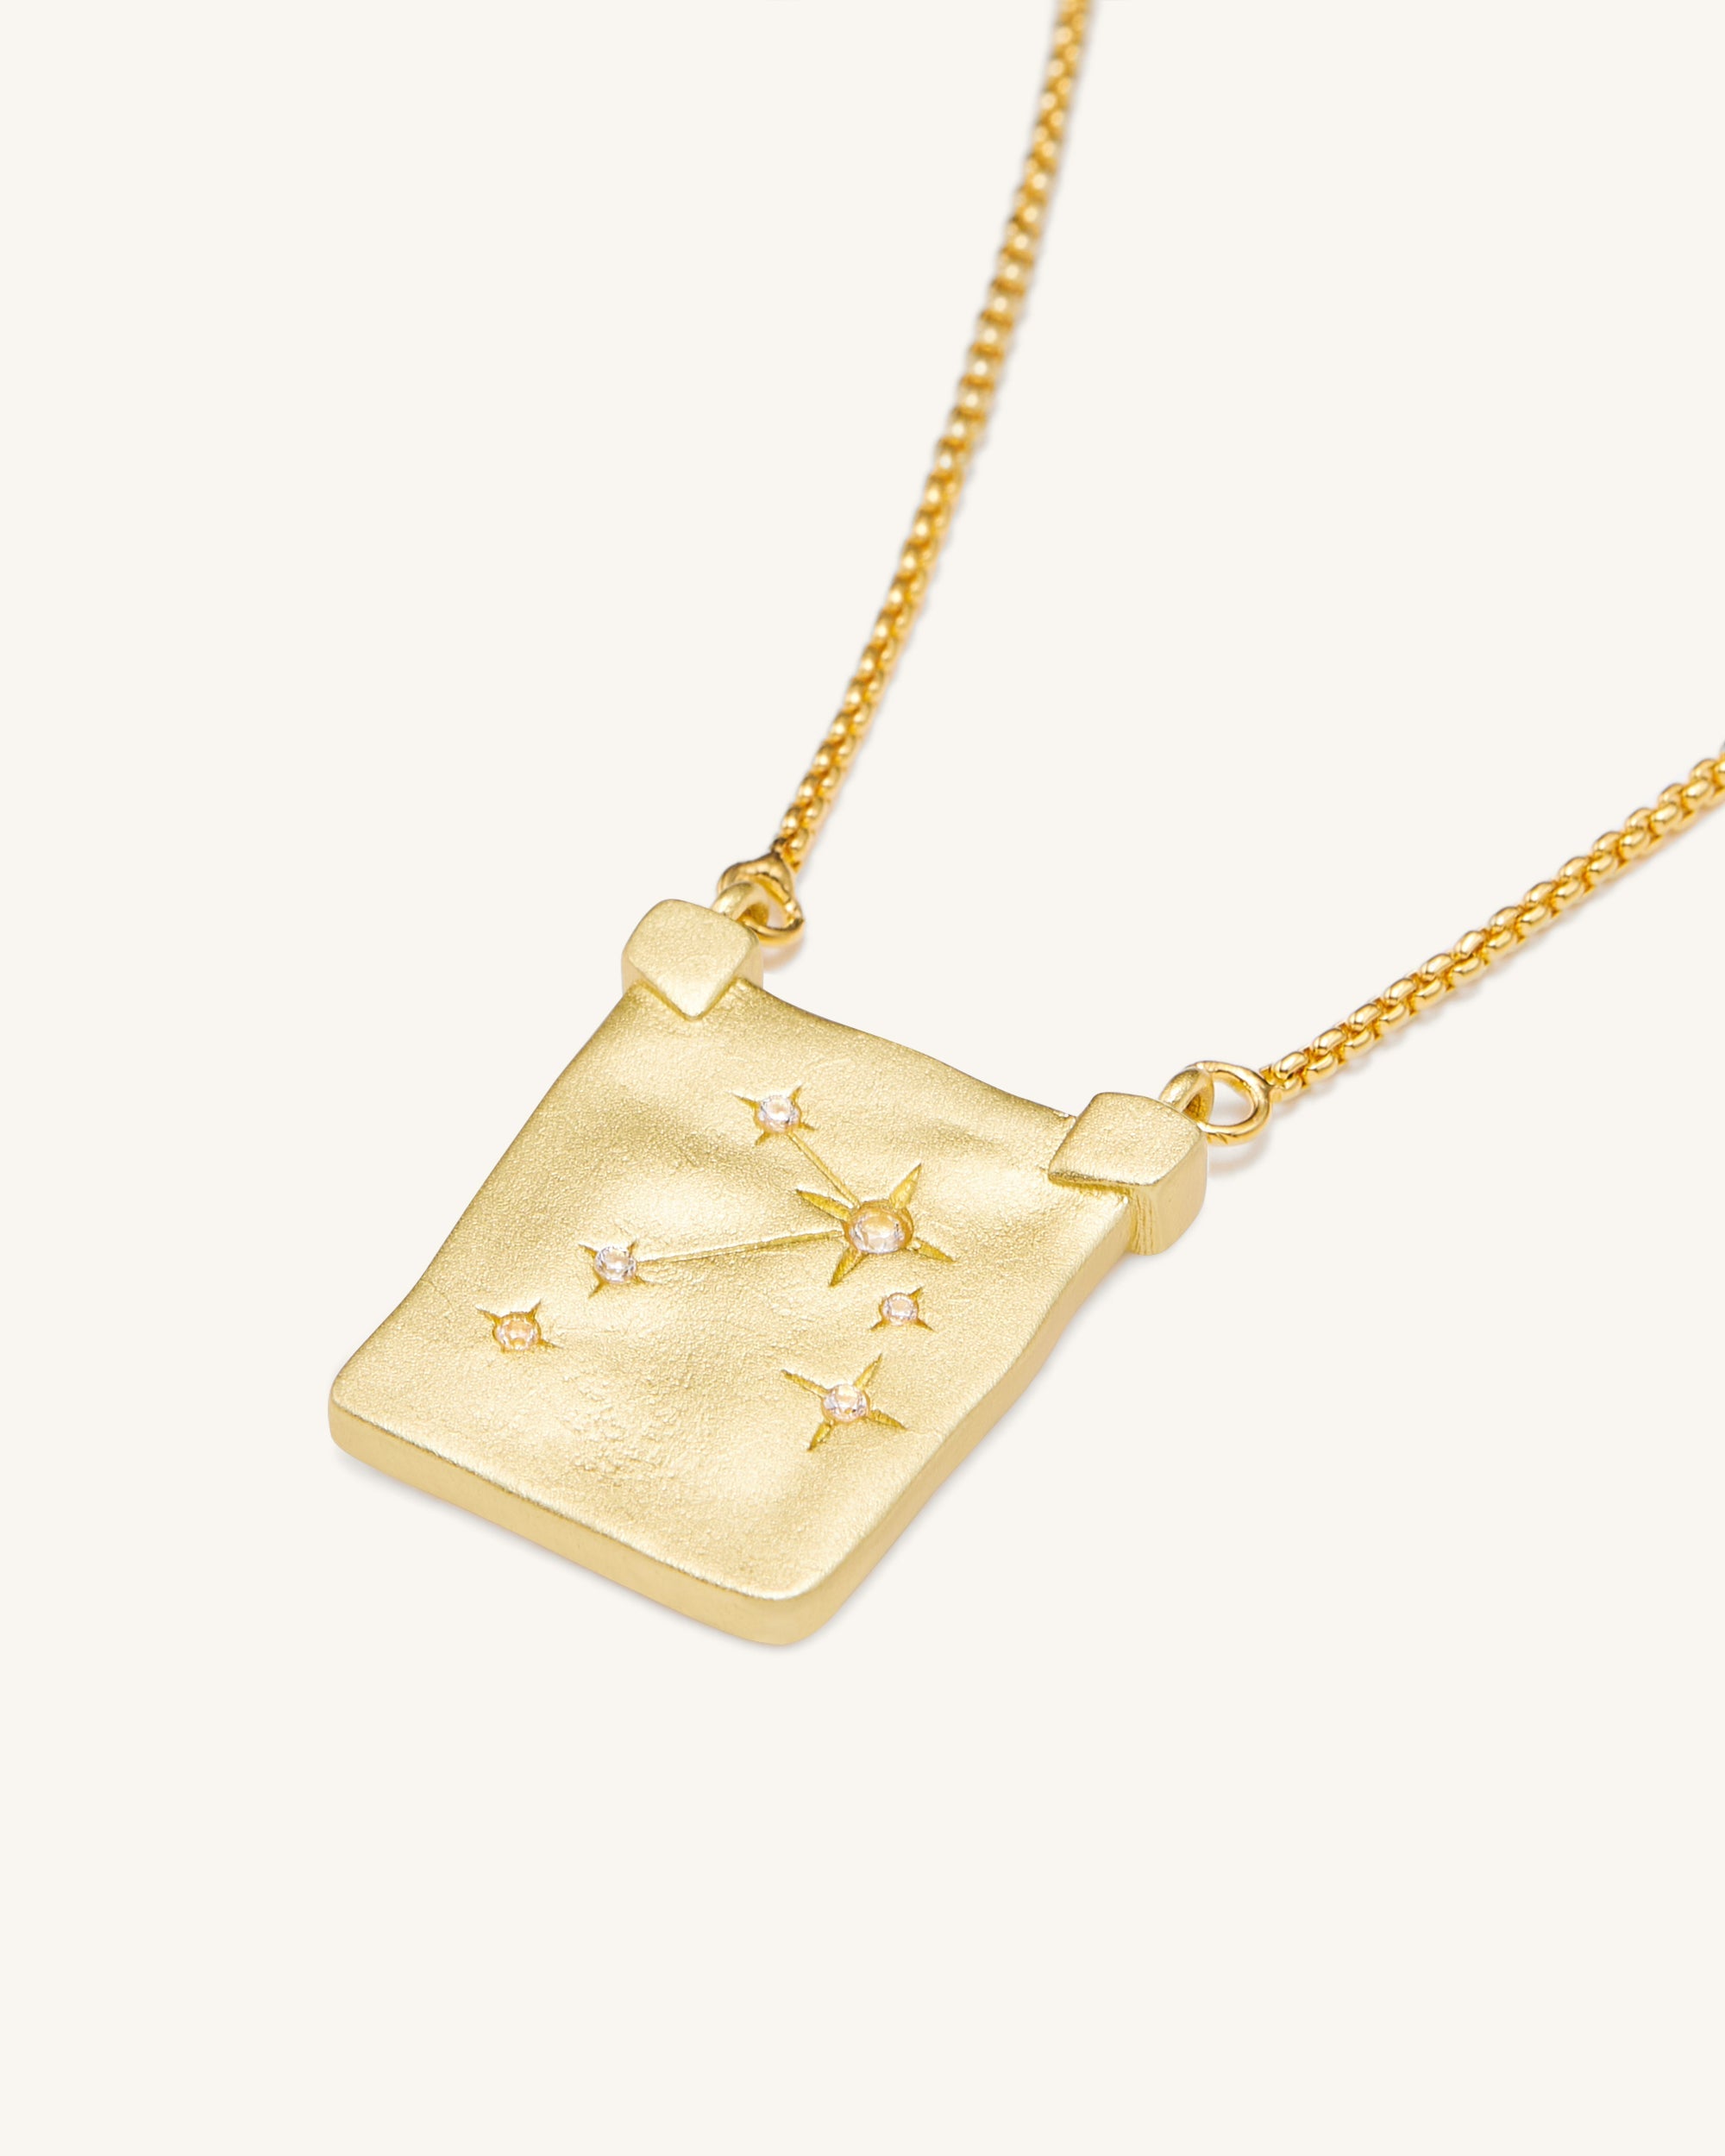 Zodiac Pendant Necklace - 18ct Gold Plated